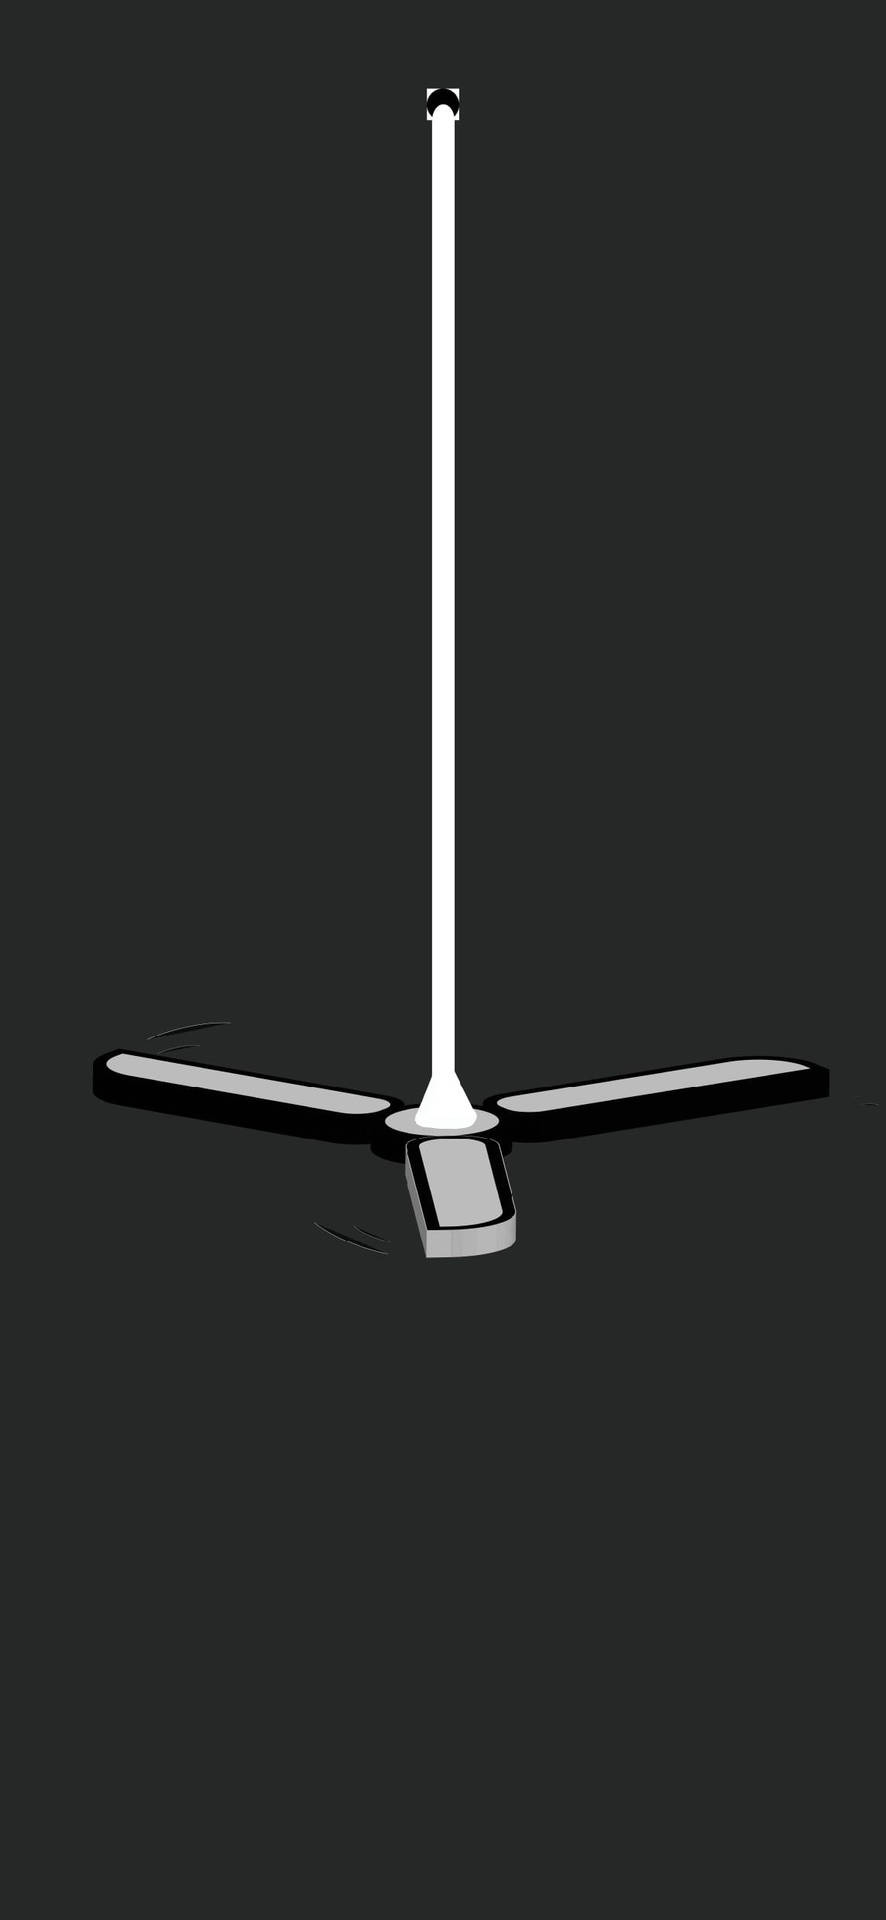 Ceiling Fan With Innovative Middle Punch Hole Design